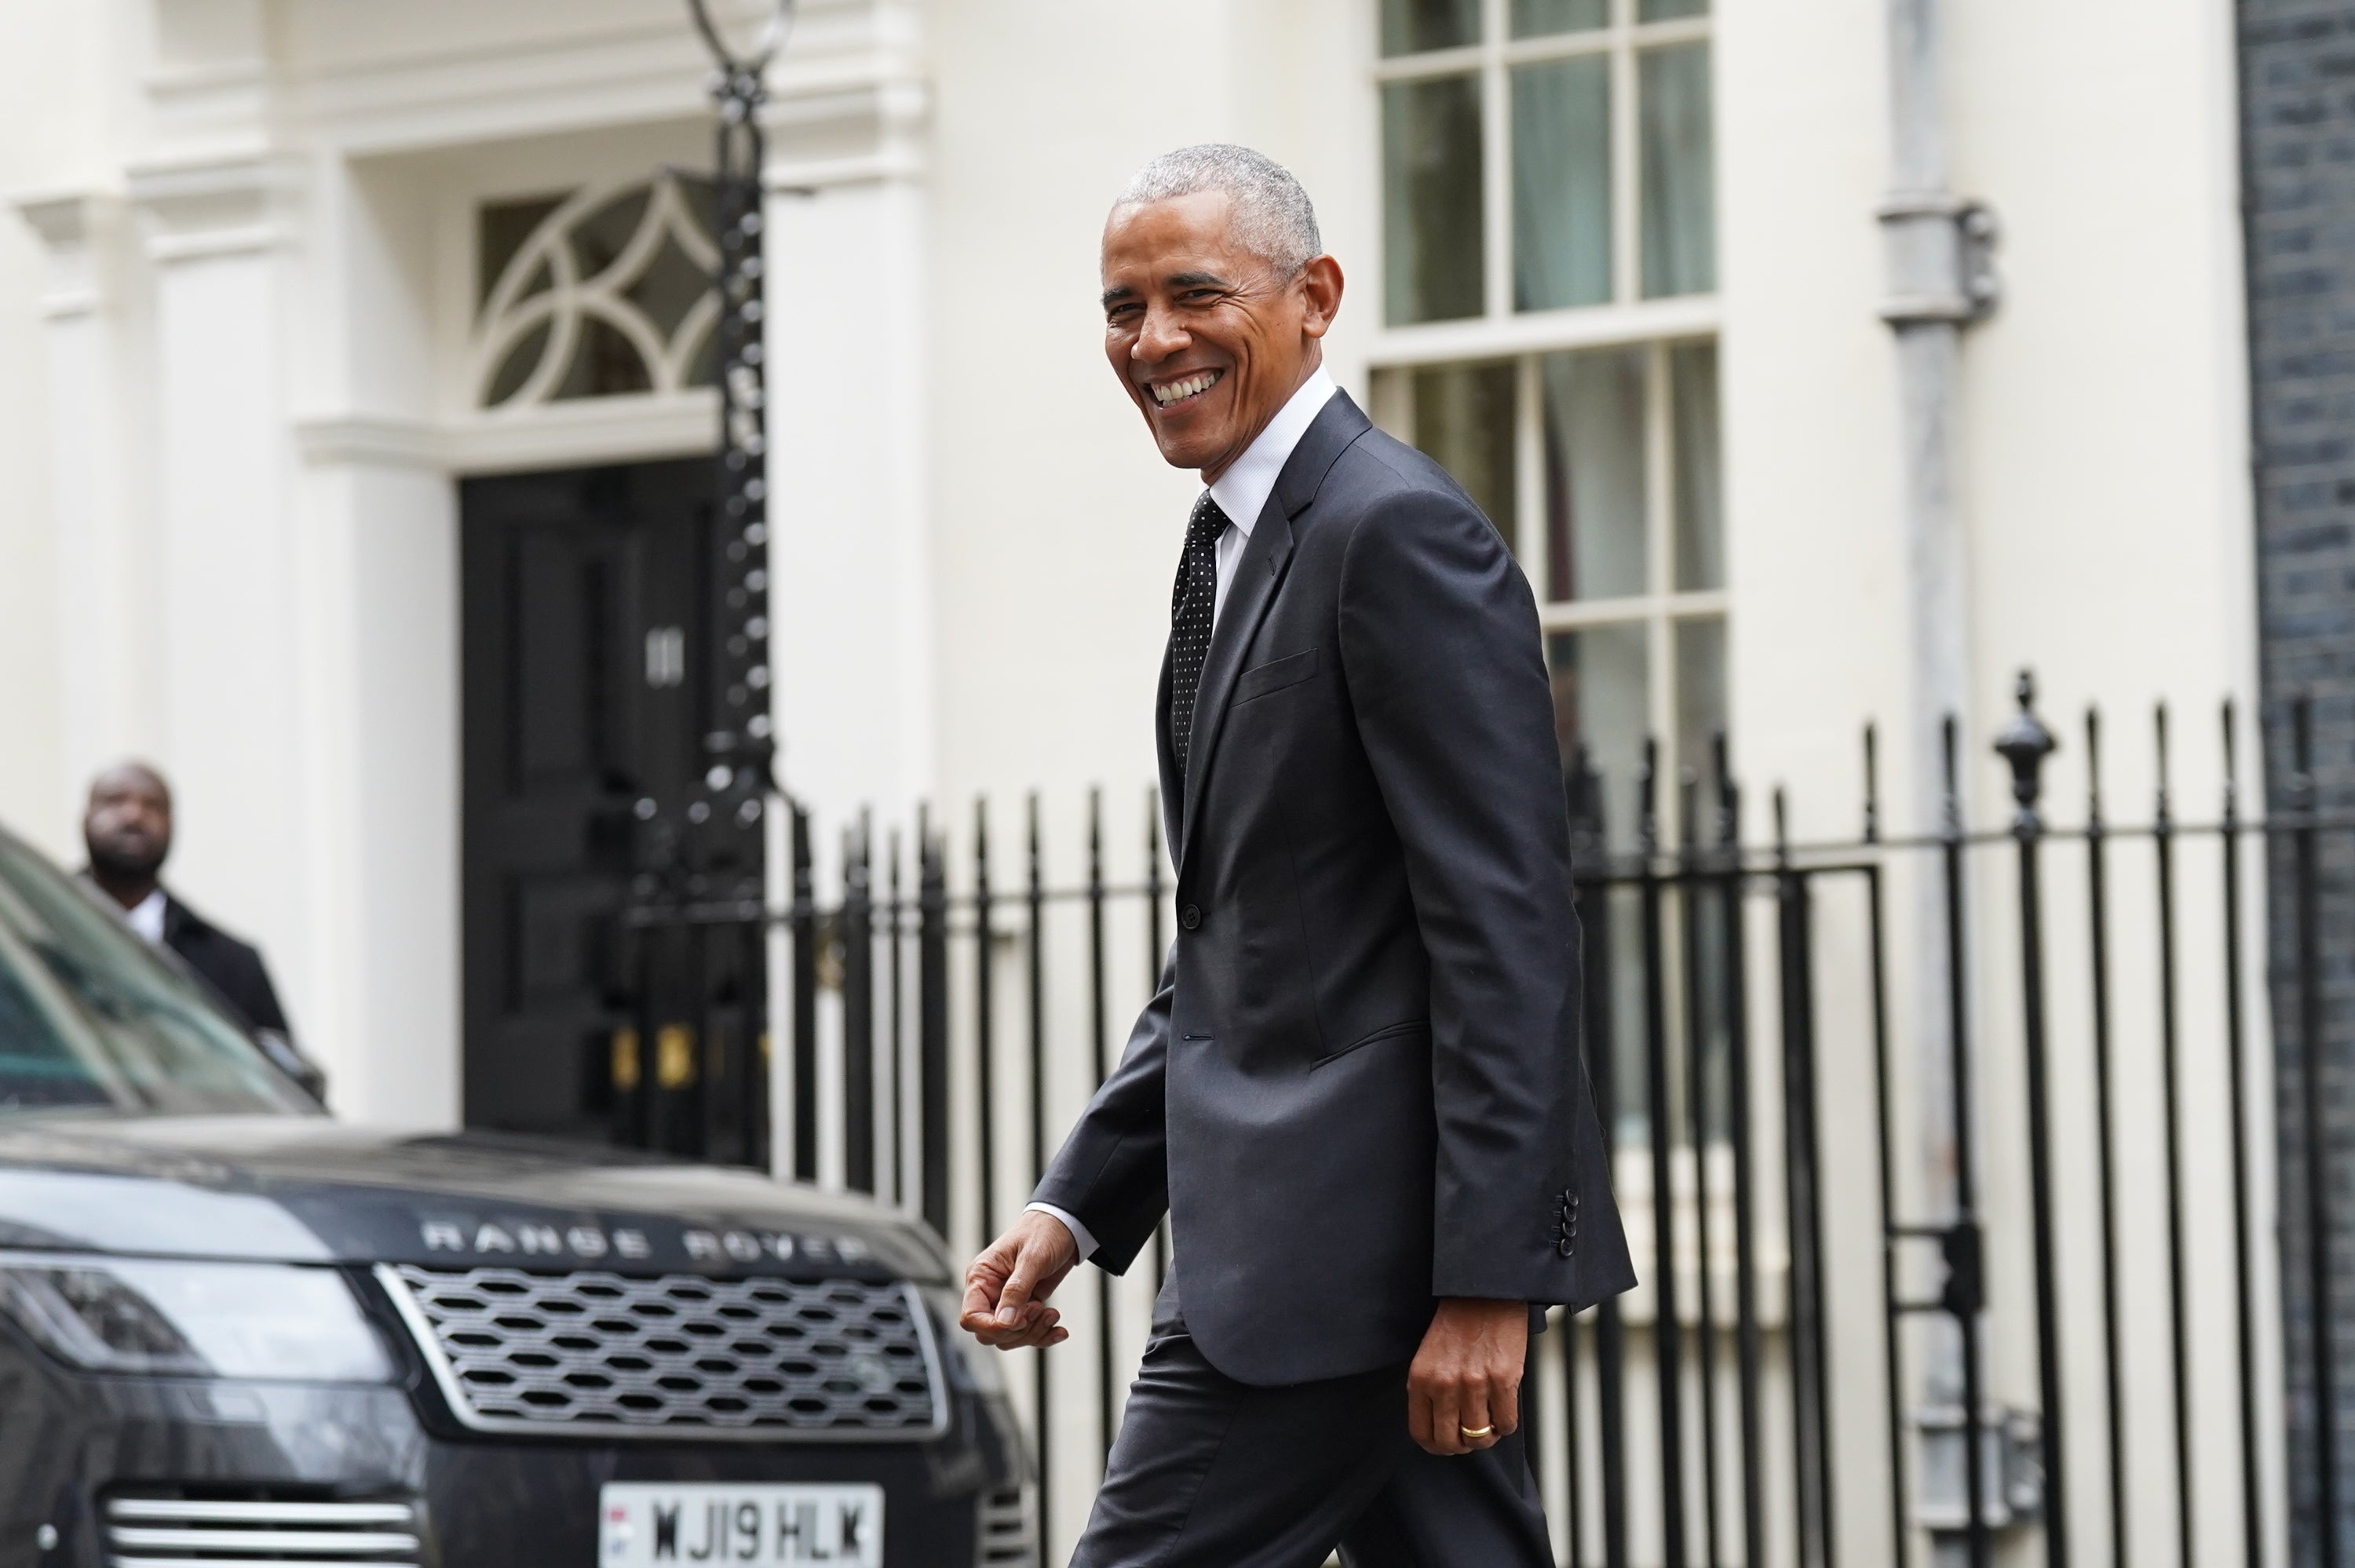 Barack Obama might be slightly greyer now than when he was in office, but this graceful, elegant and courteous statesman is well remembered as a friend to Britain